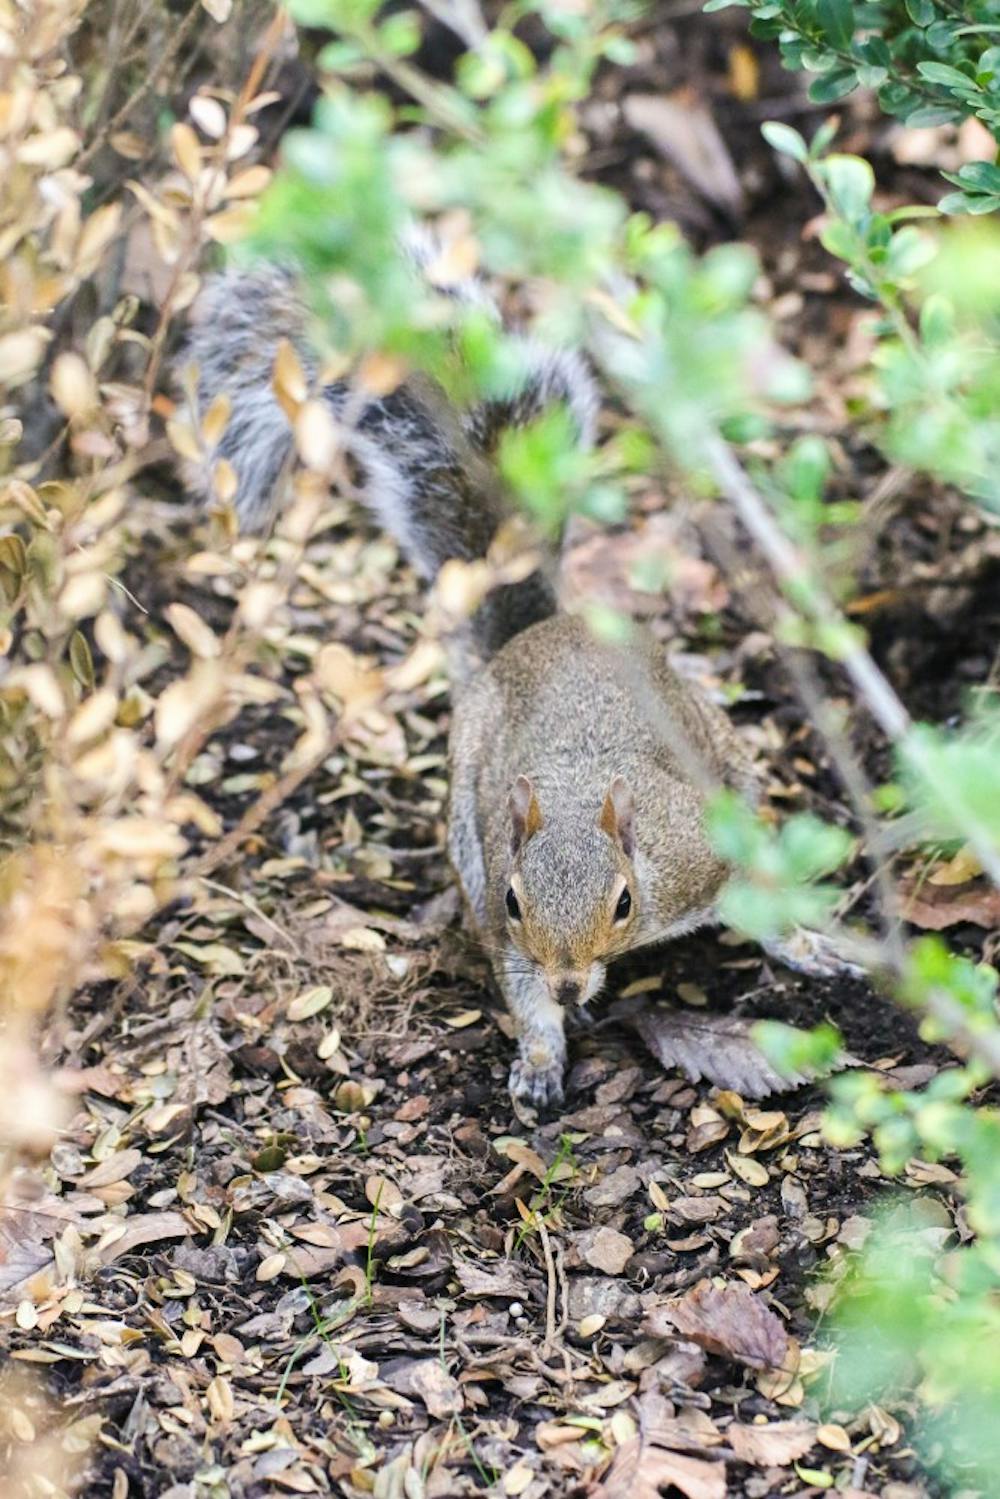 This squirrel was spotted in the hedges near West Union.